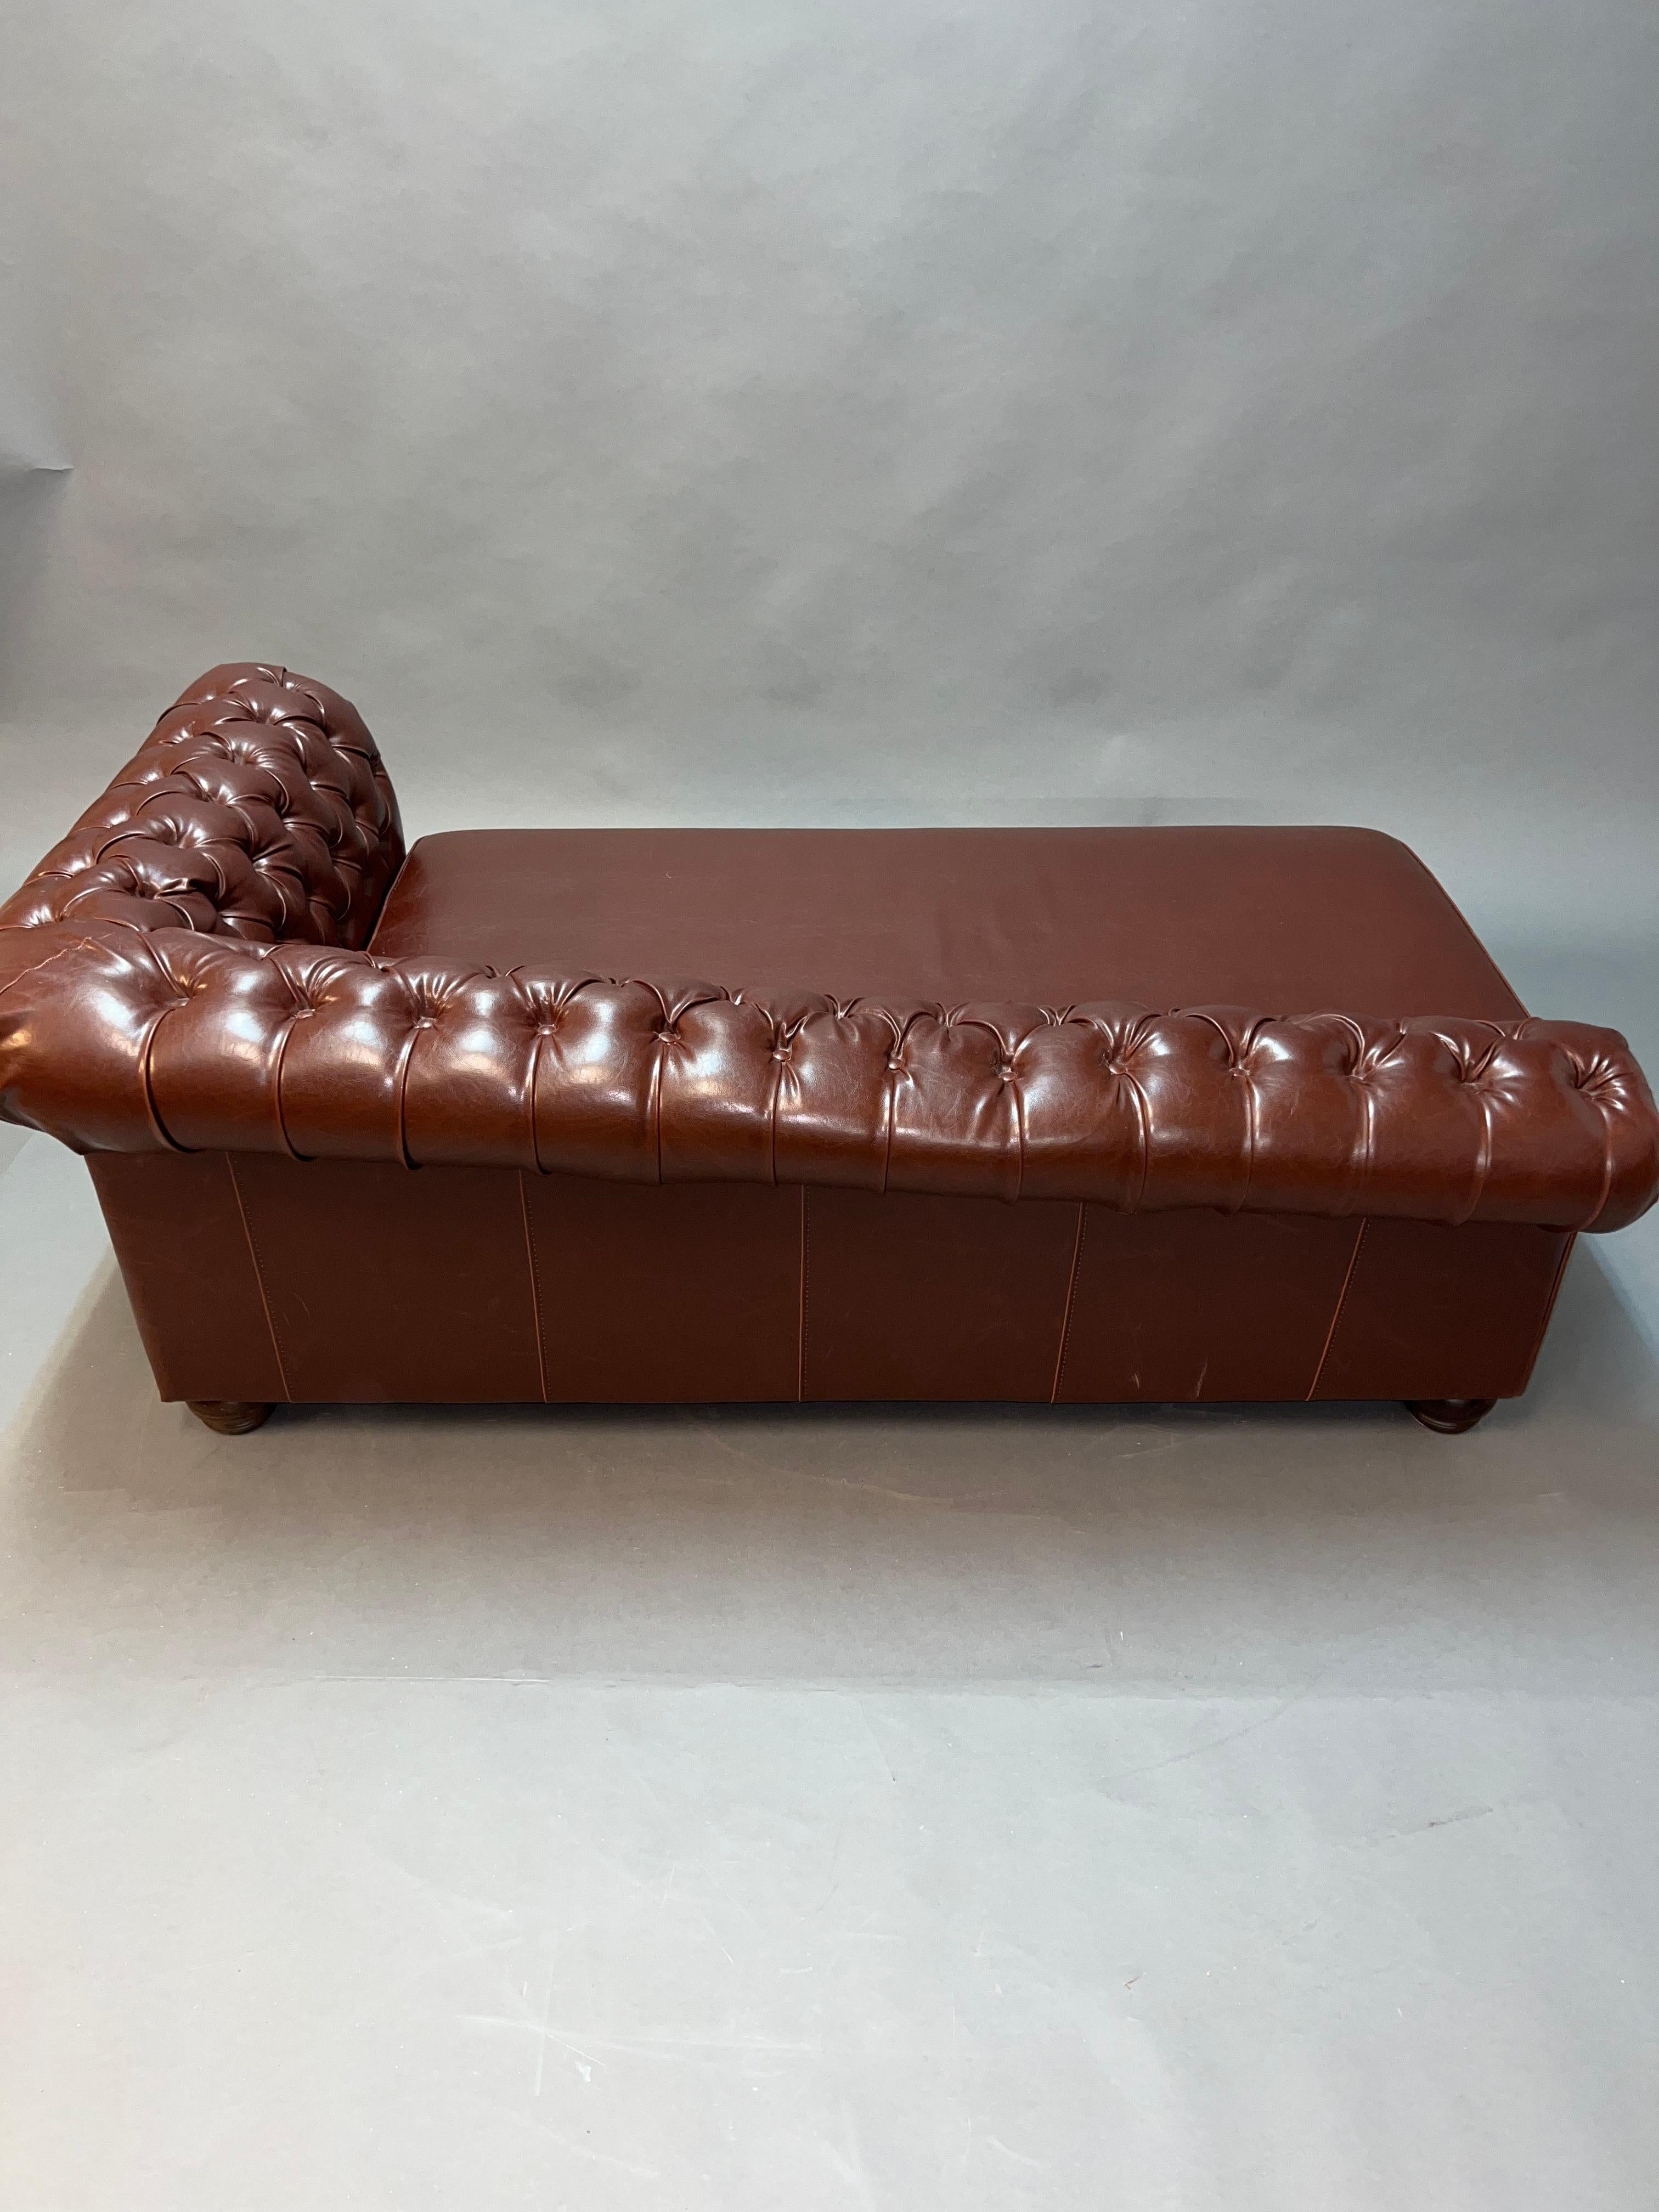 Lovely Vintage Chesterfield Brown Leather Look Chaise Lounge Daybed Sofa For Sale 2